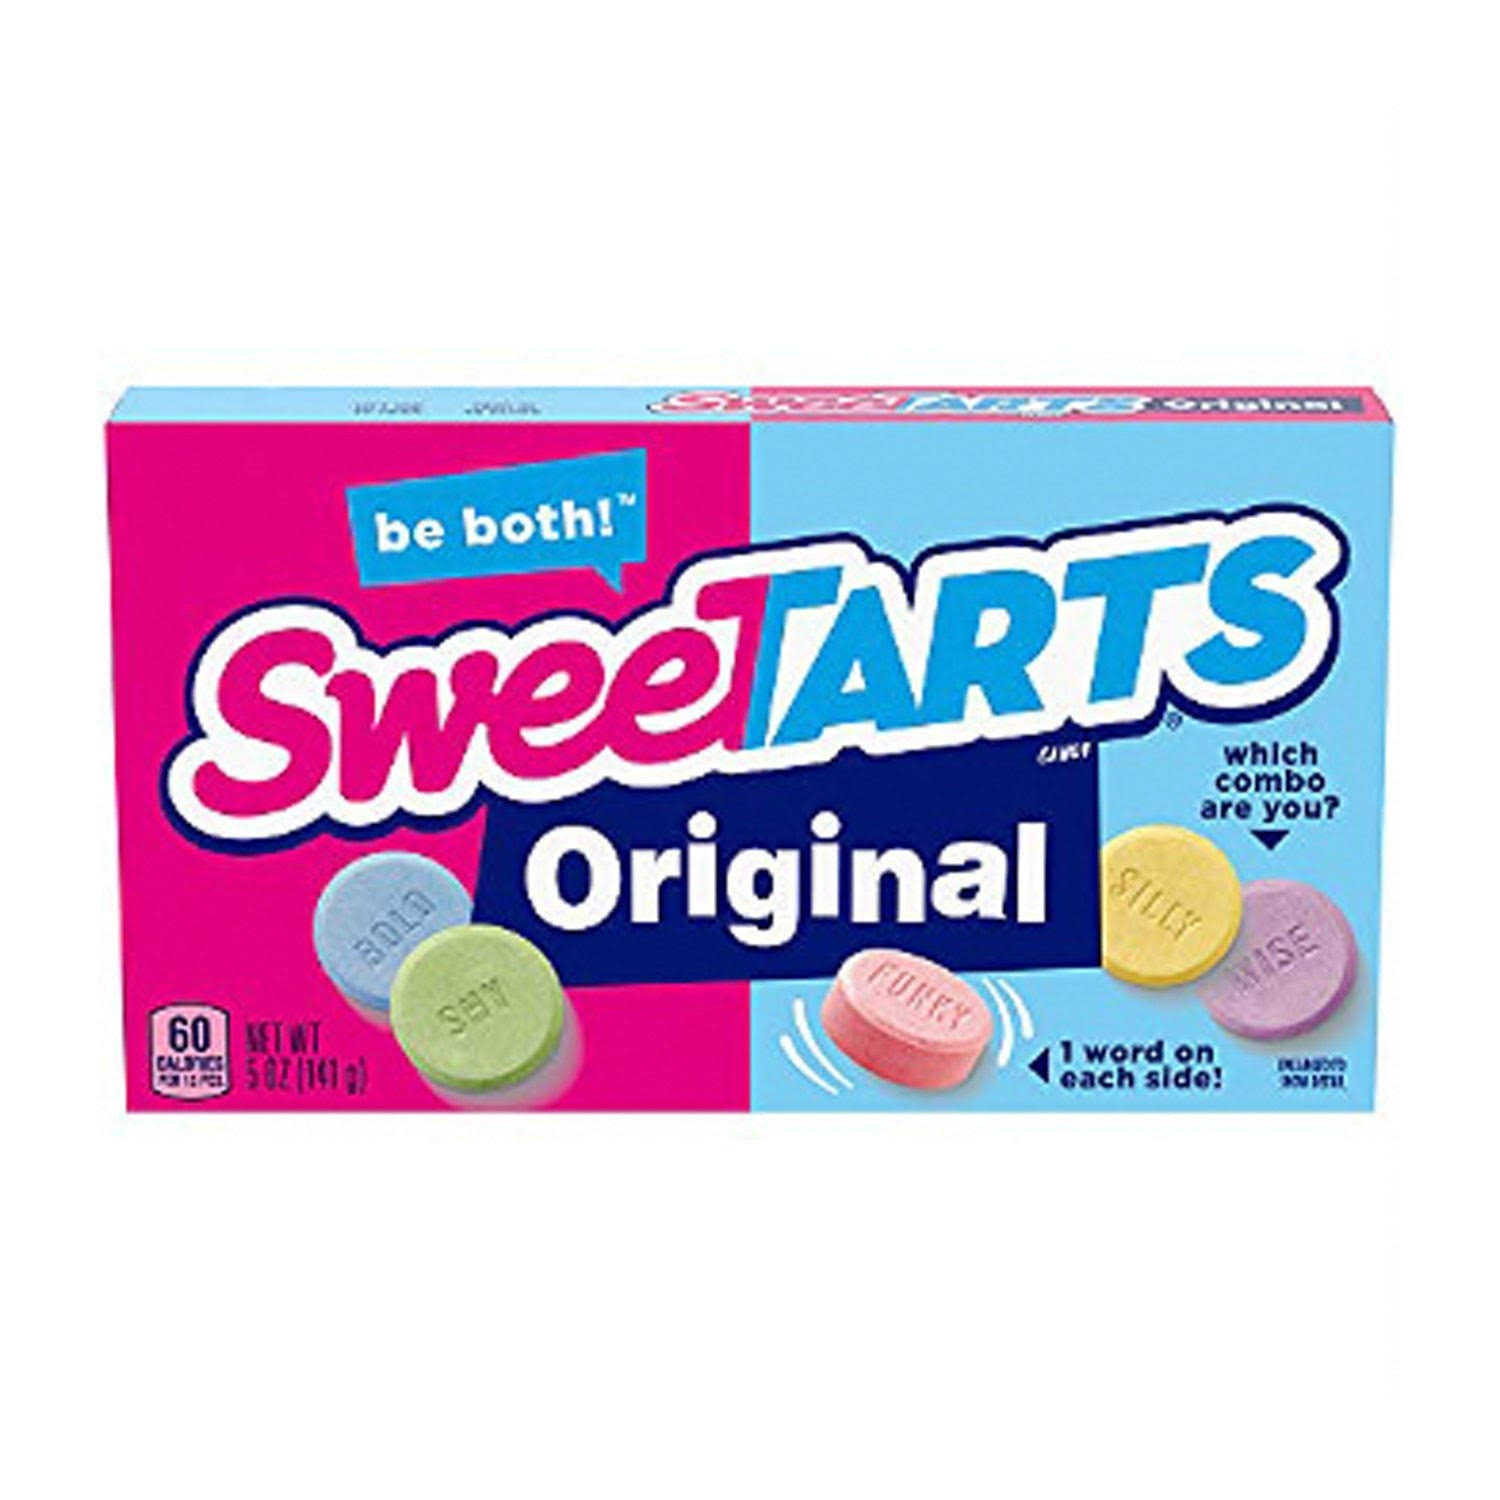 Sweetarts Tangy Candy - 5 oz